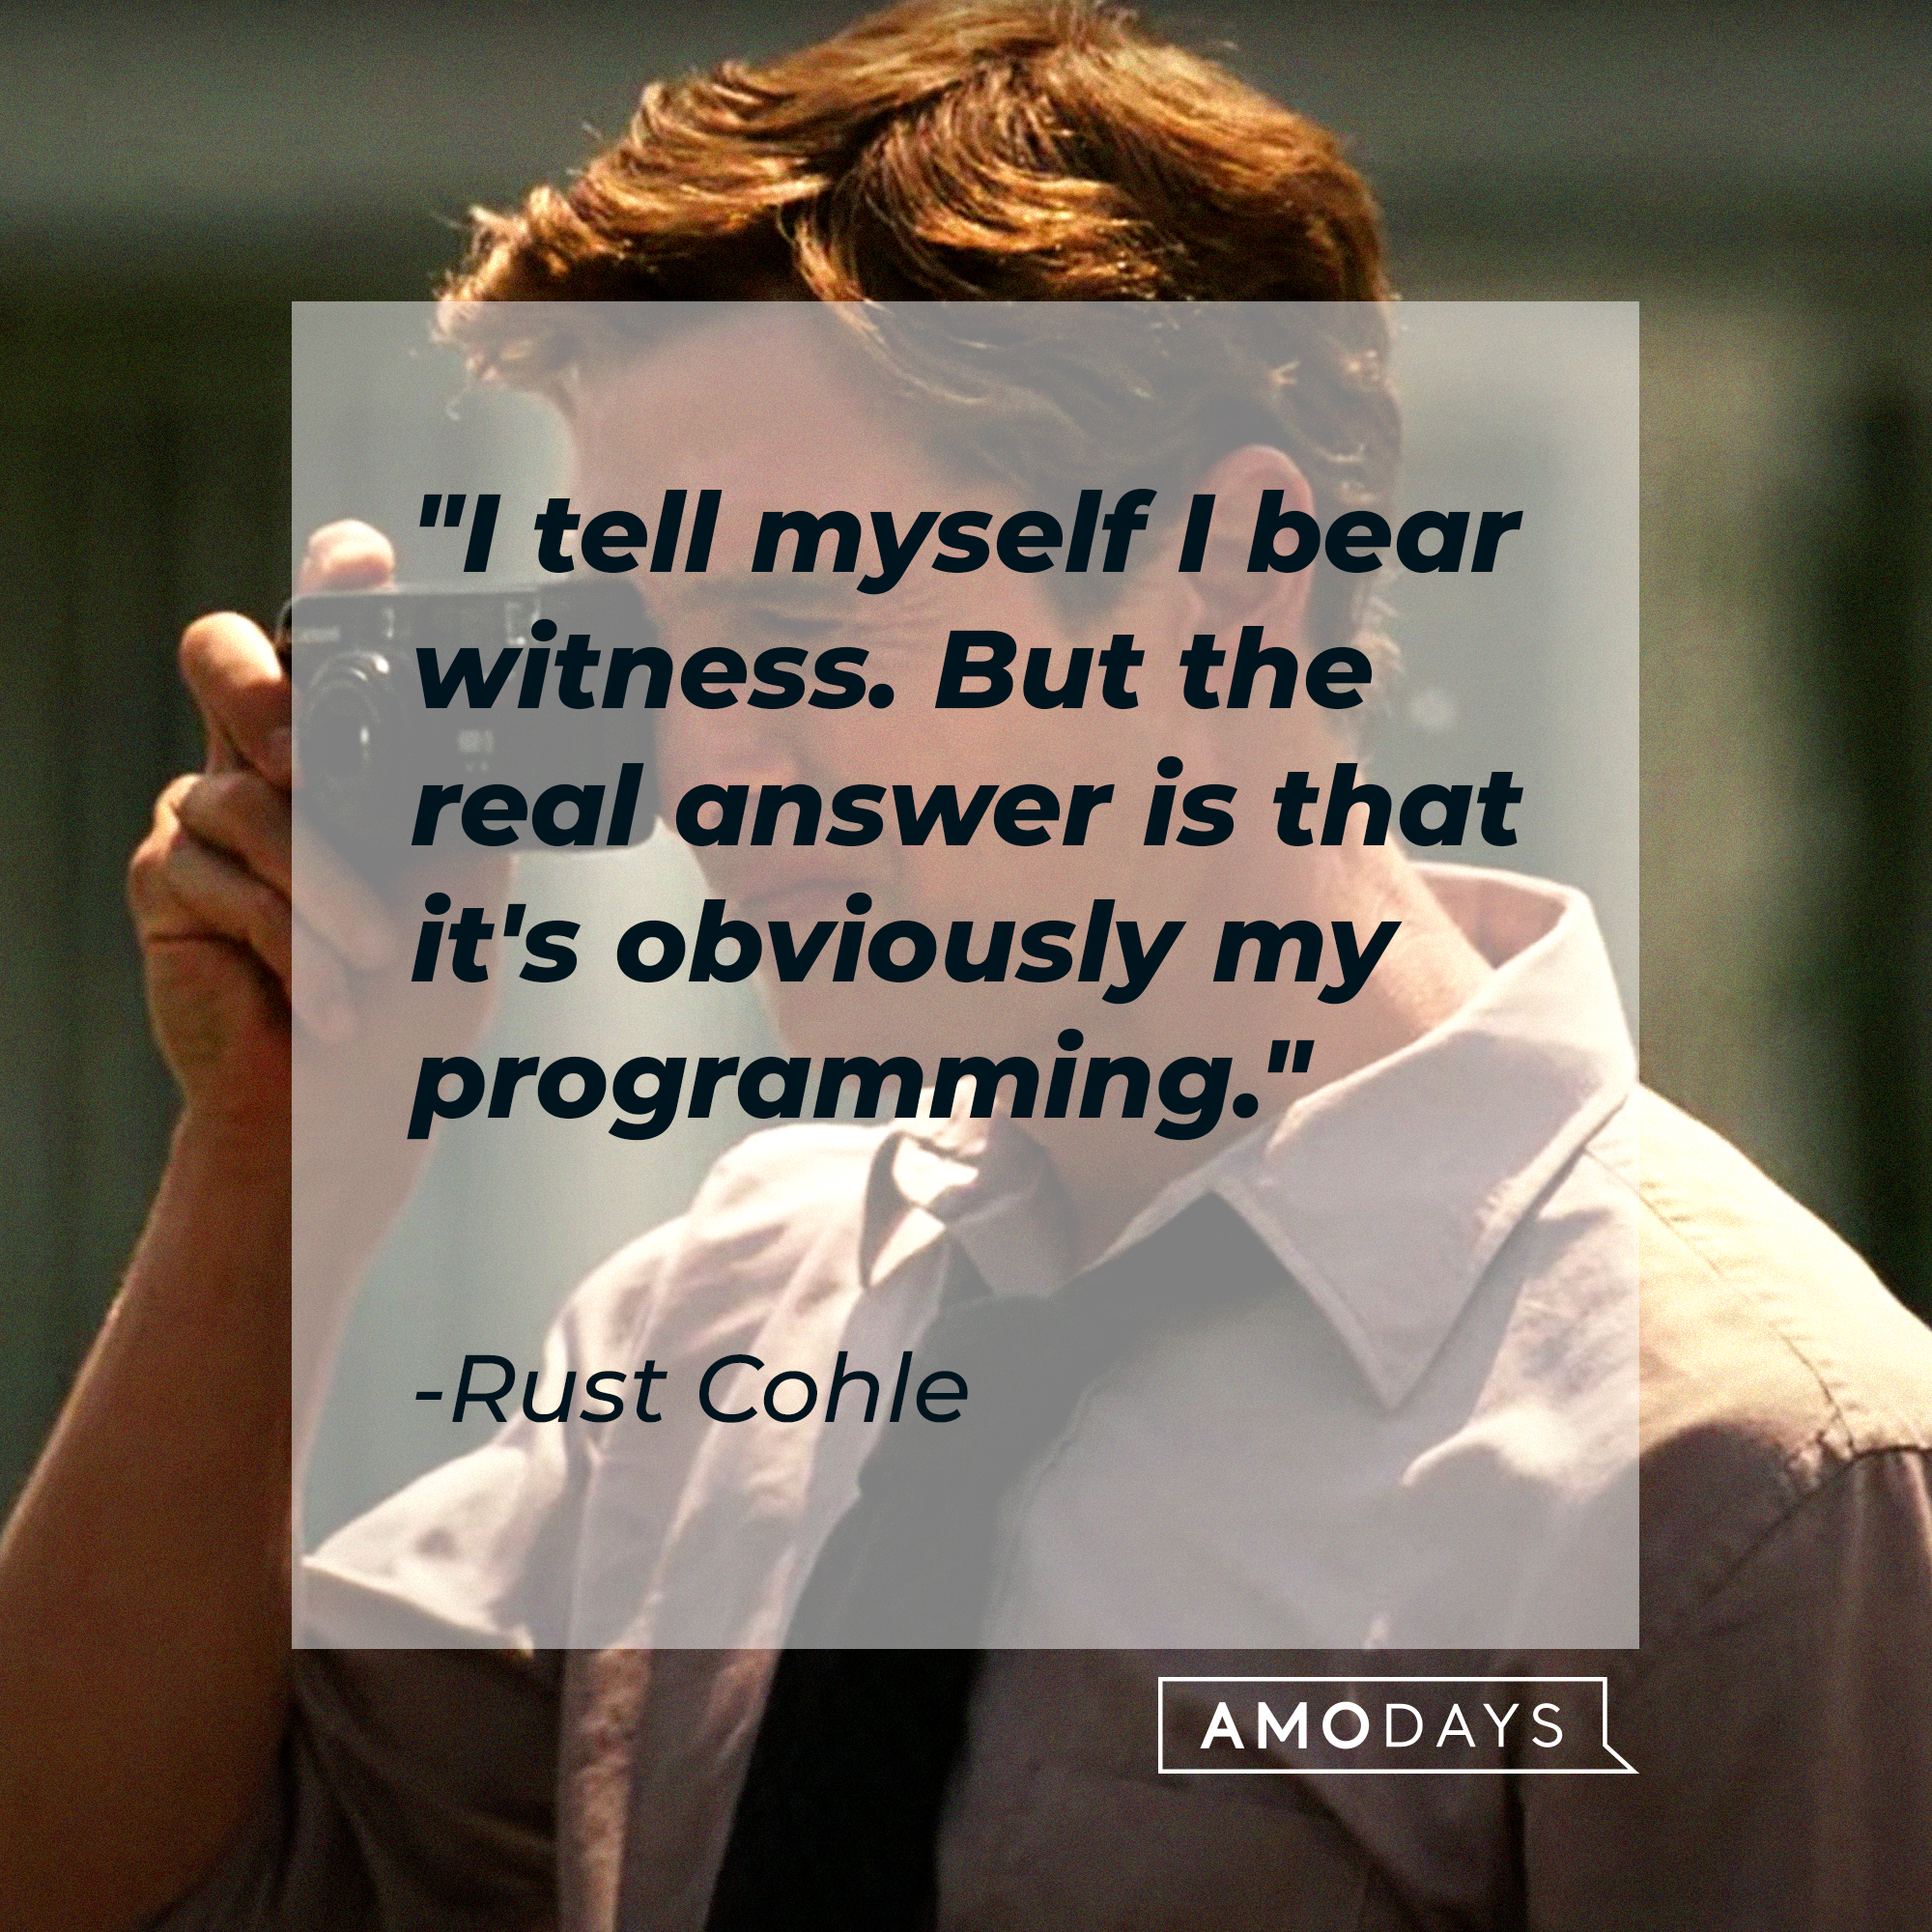 Rust Cohle's quote: "I tell myself I bear witness. But the real answer is that it's obviously my programming." | Source: facebook.com/TrueDetective